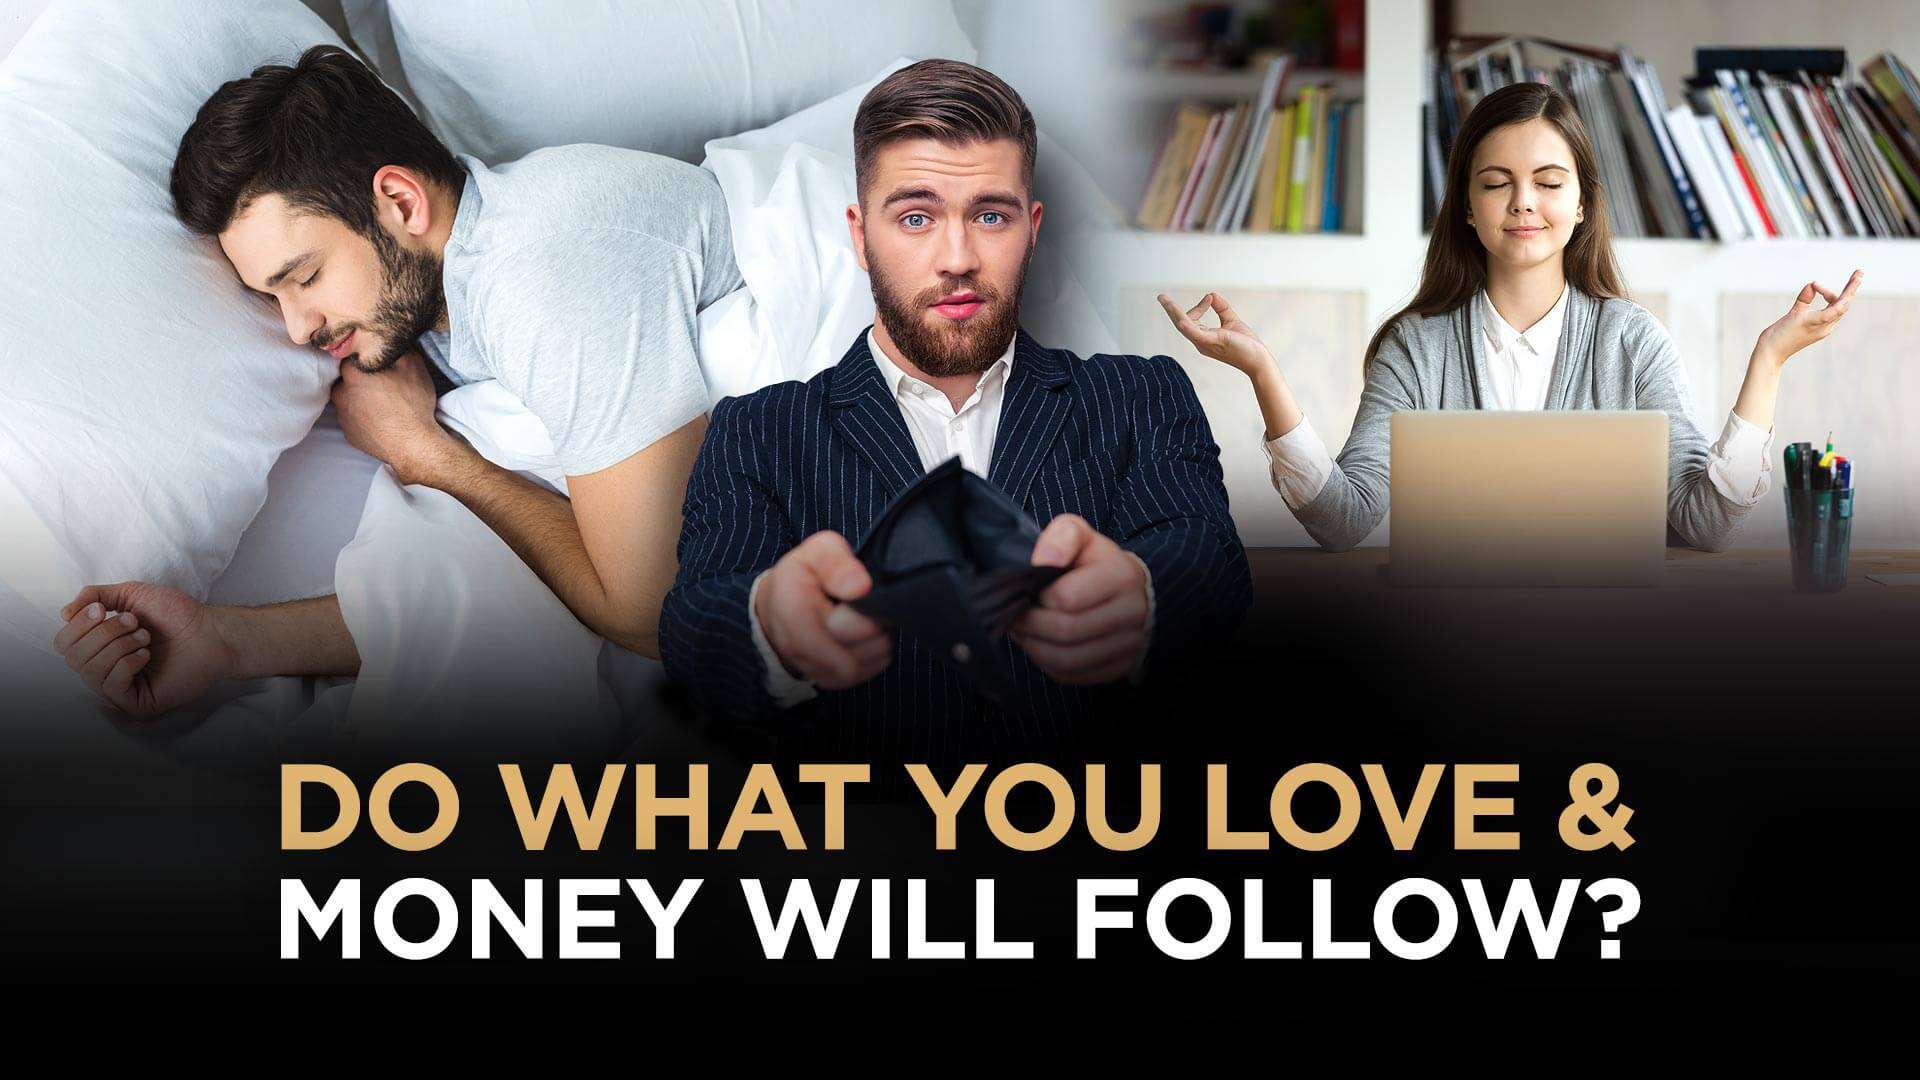 famous sayings - “Do what you love and the money will follow “. I did what I loved for almost 20 years. The money did not follow.